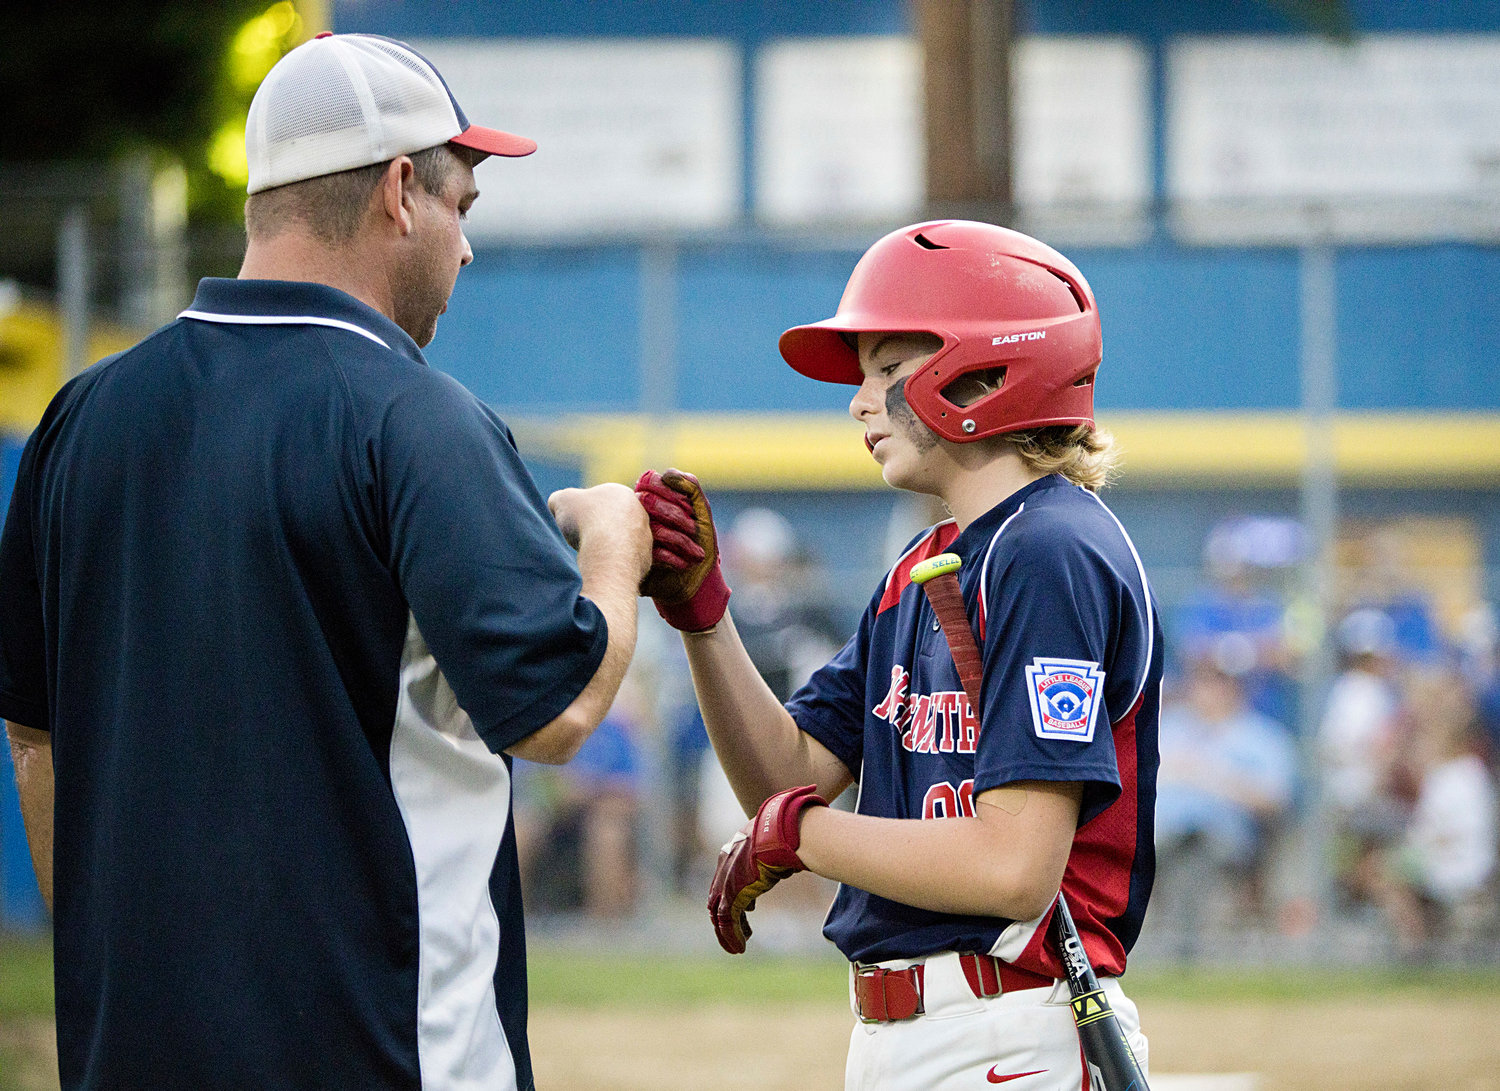 Tyler Doucet is offered encouragement before going up to bat against Cumberland.